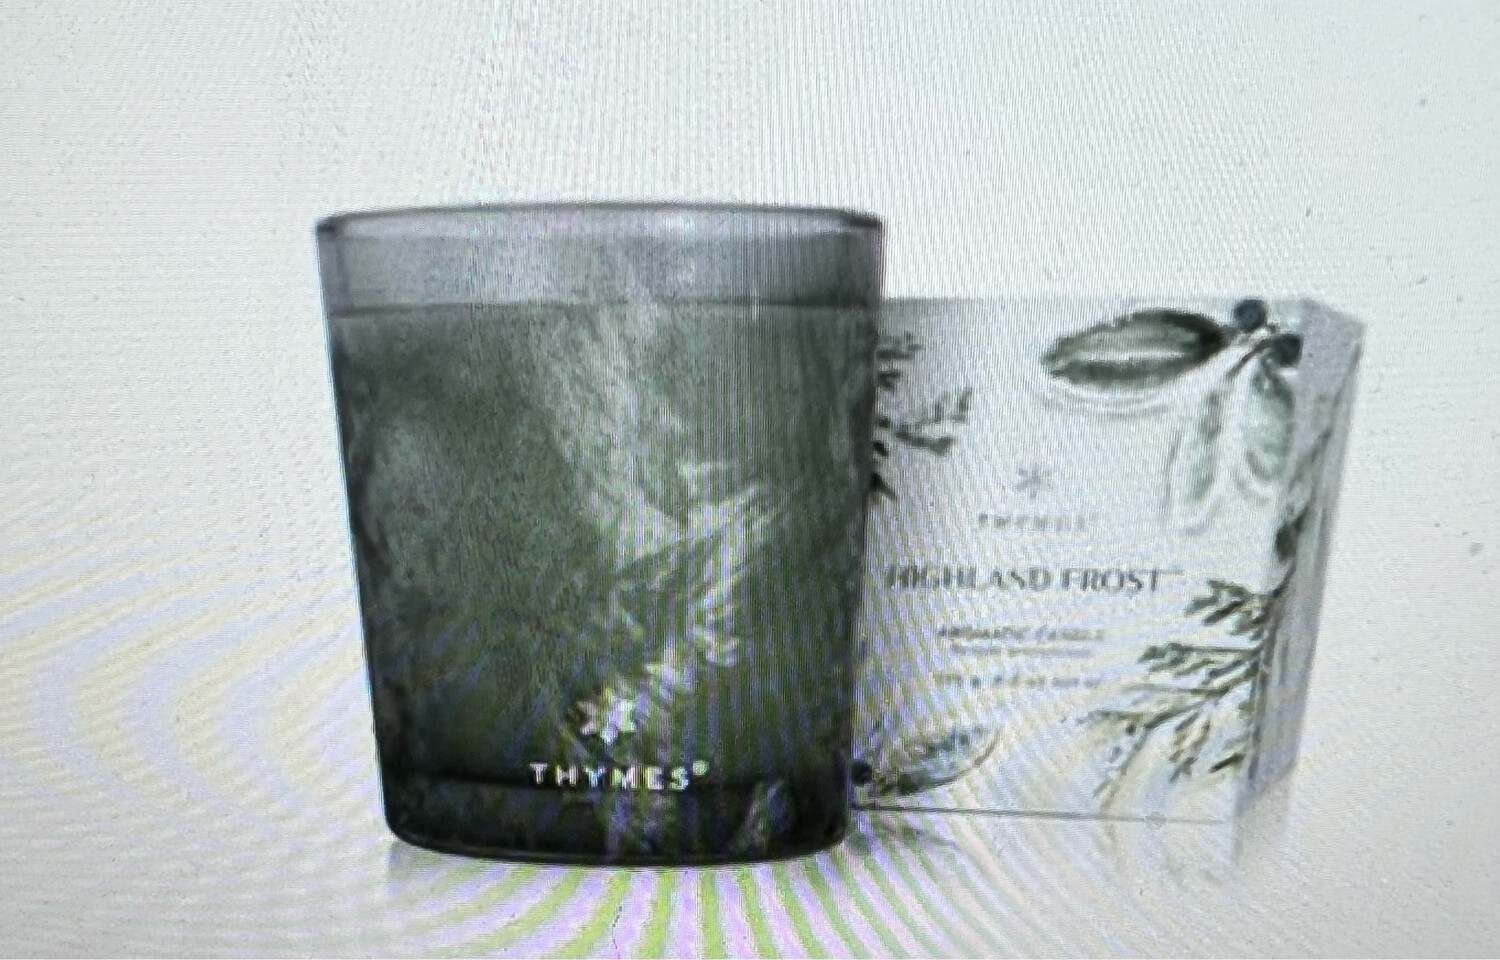 THYMES Highland Frost 6.5oz Boxed